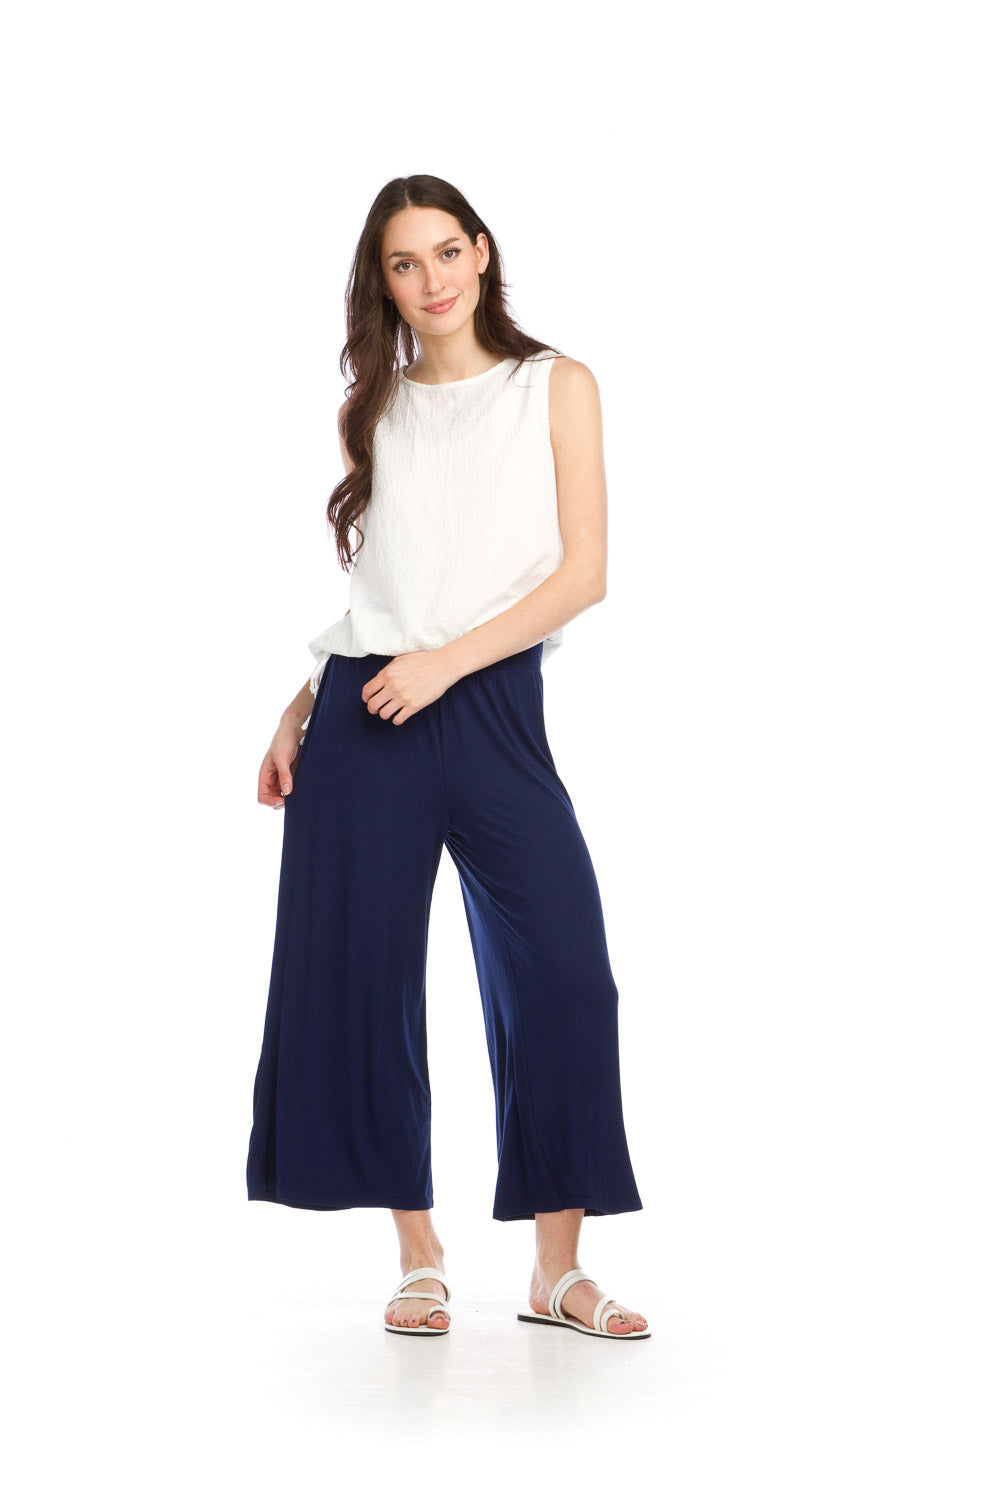 PP16839 NAVY Bamboo Knit Coulotte Pants